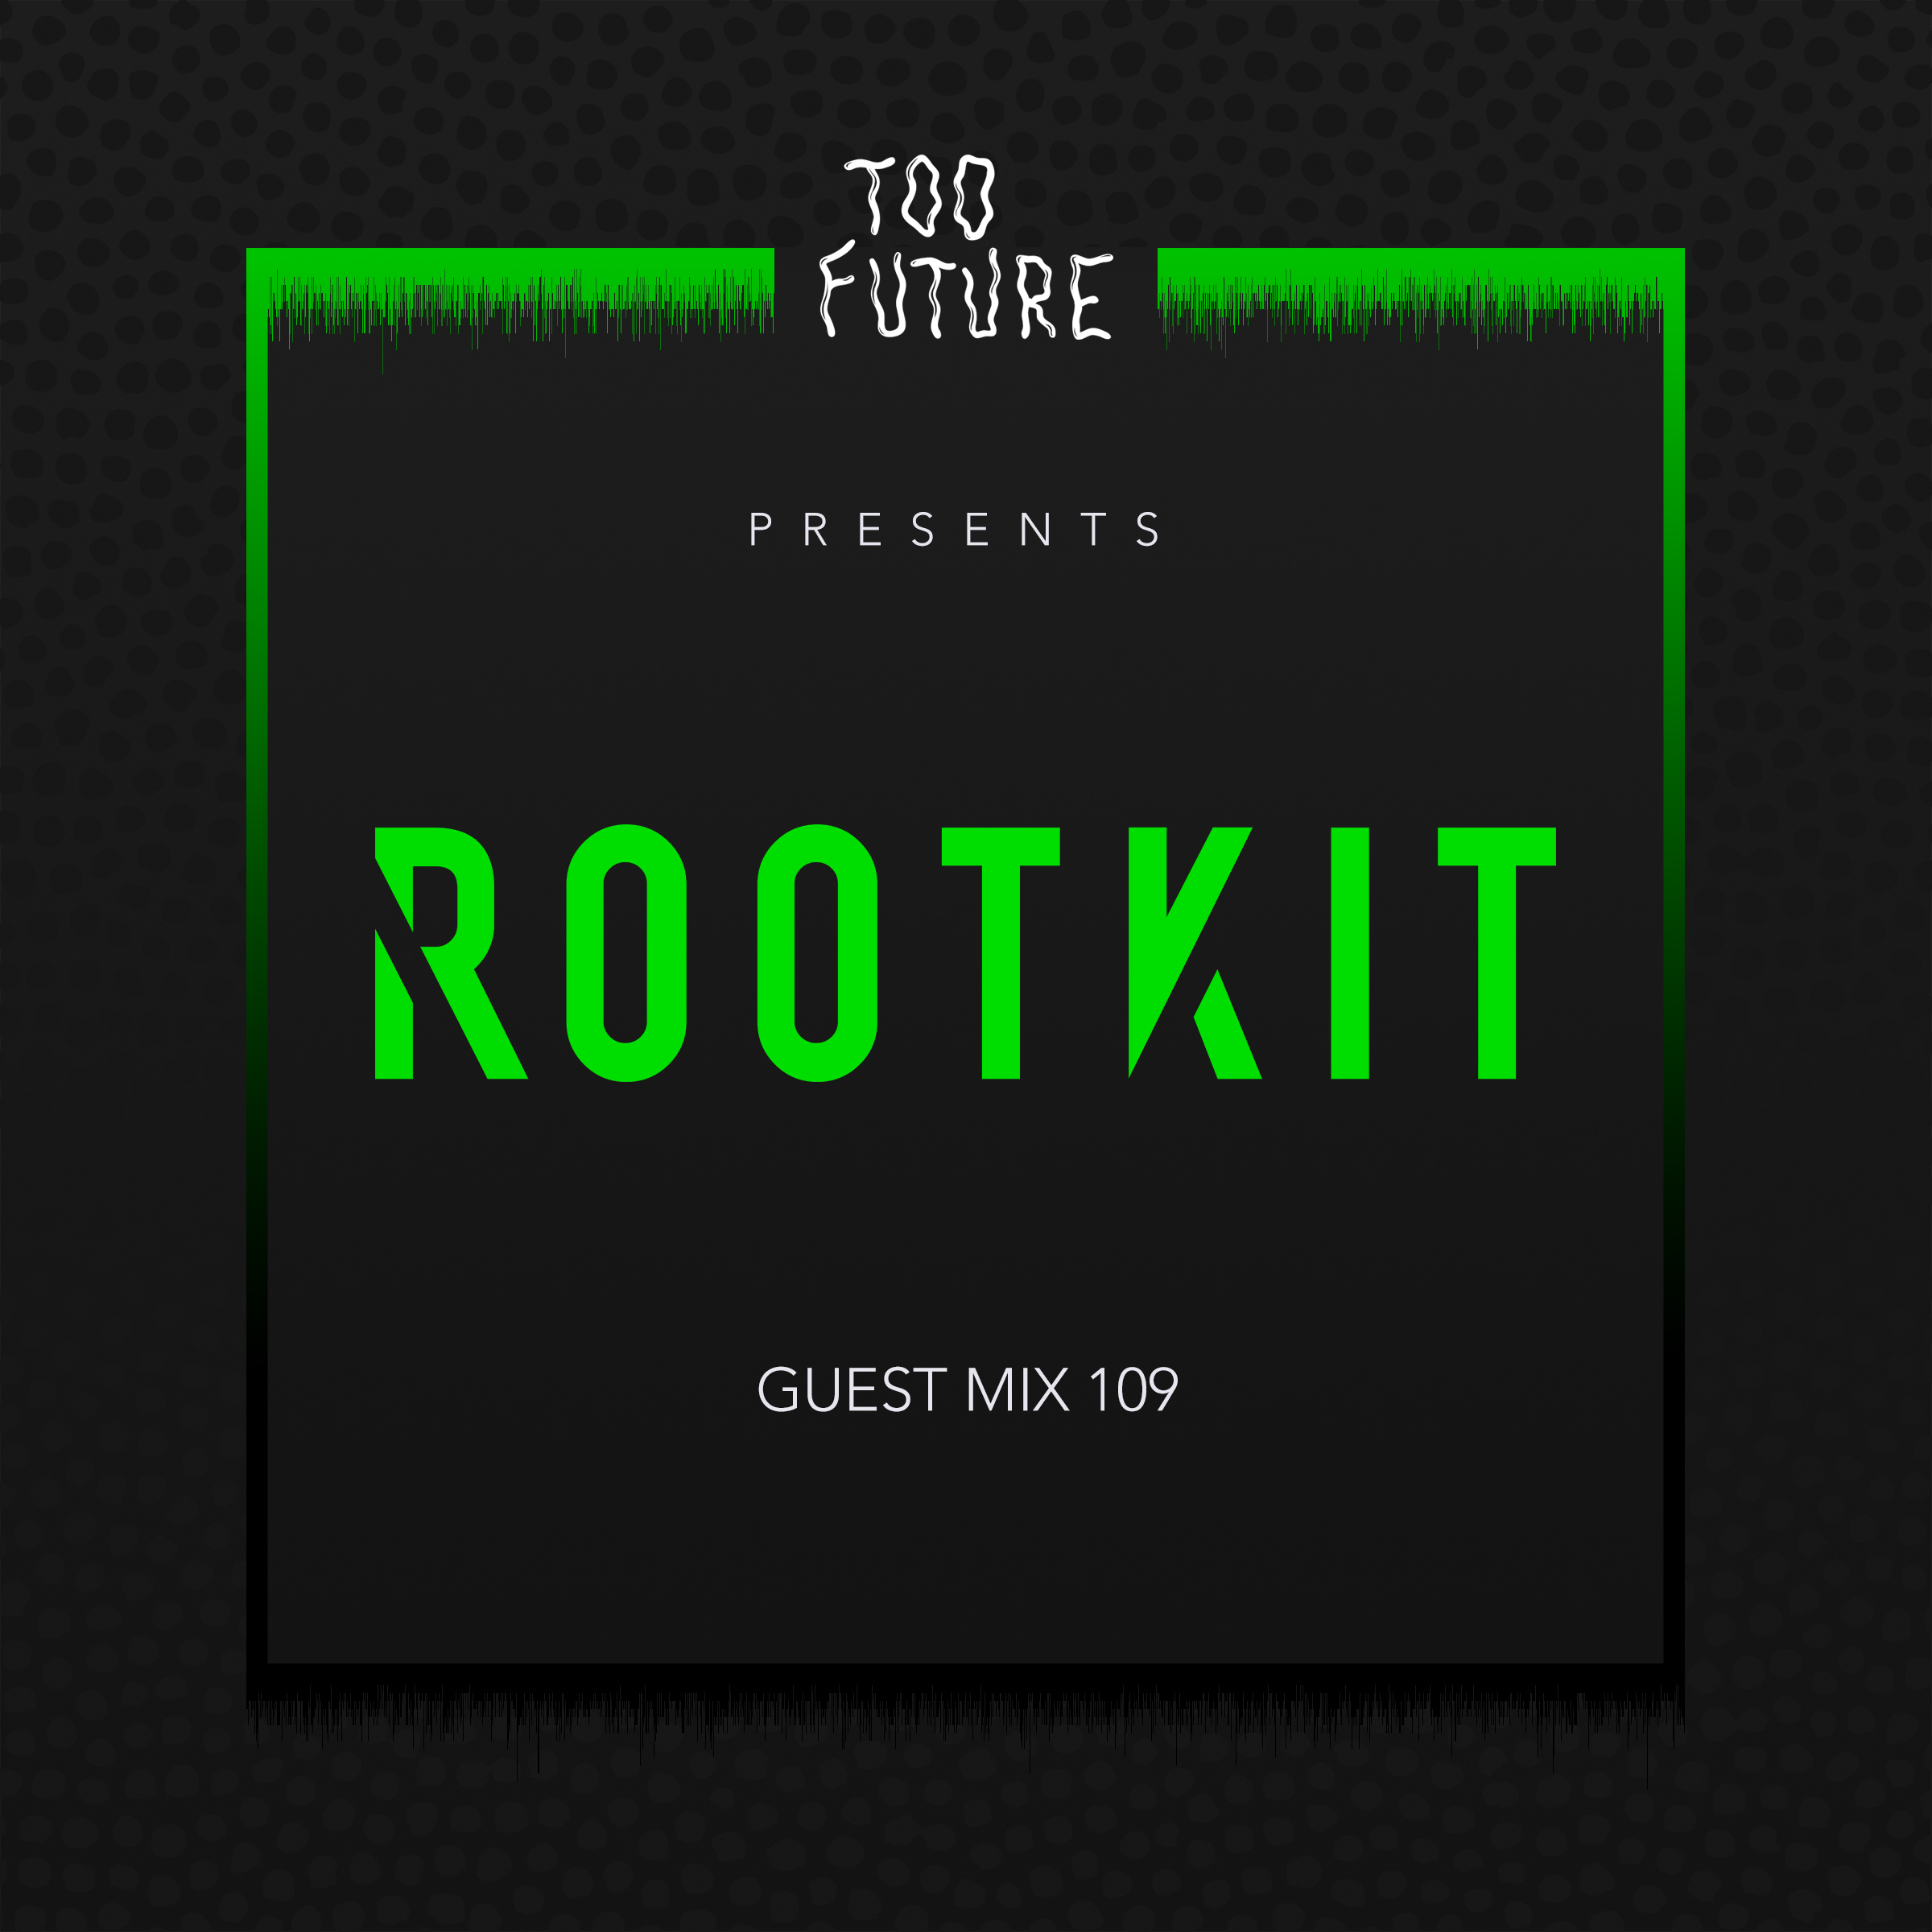 TOO-FUTURE-GUEST-MIX-109-ROOTKIT-V2